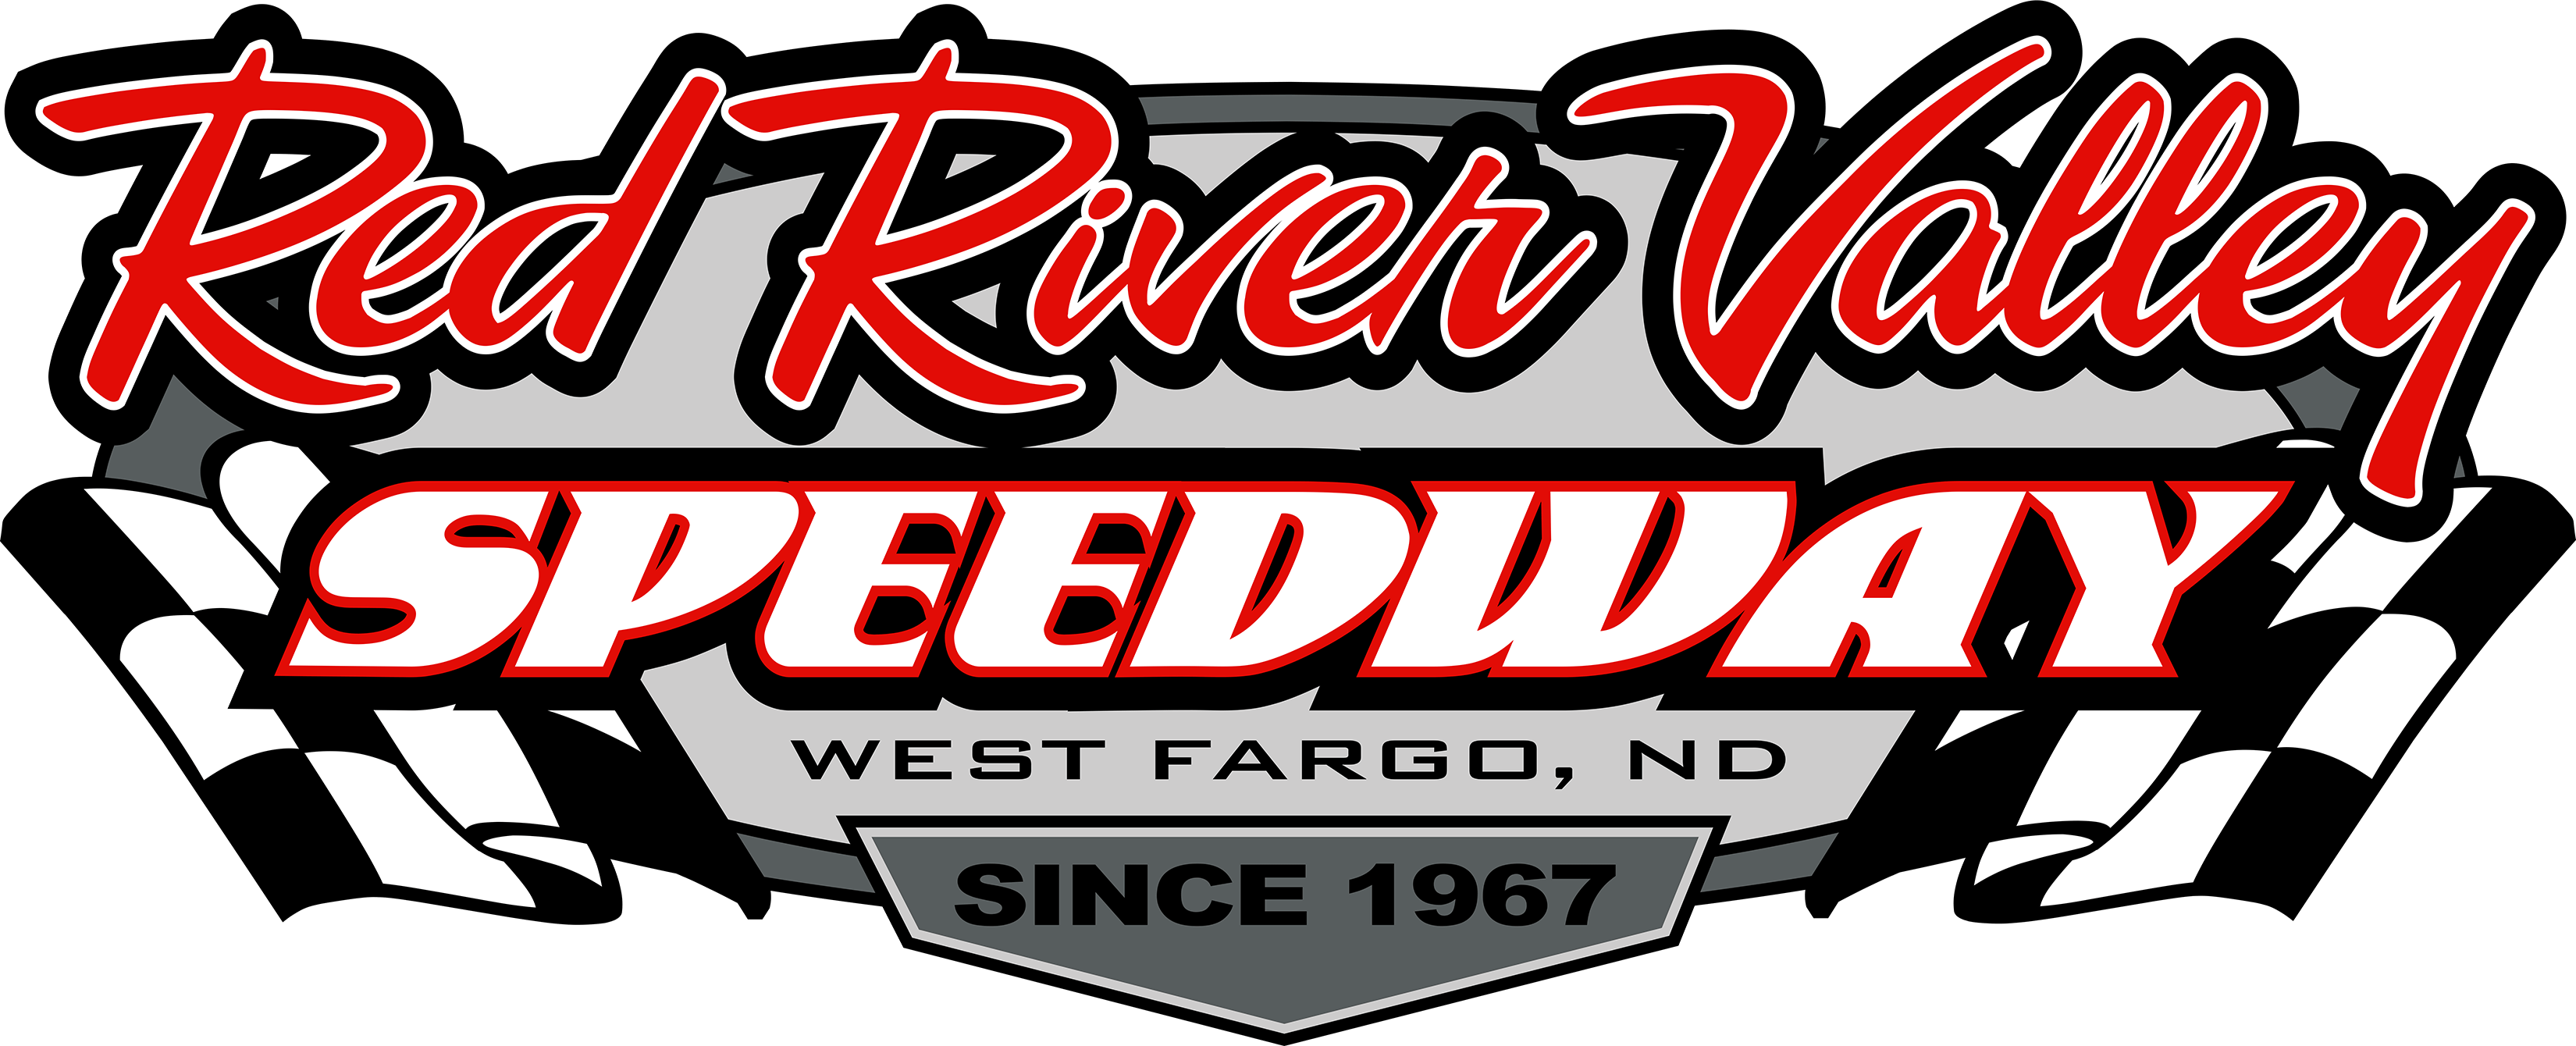 Racetrack Logo - Red River Valley Speedway - The FASTEST Track Is BACK